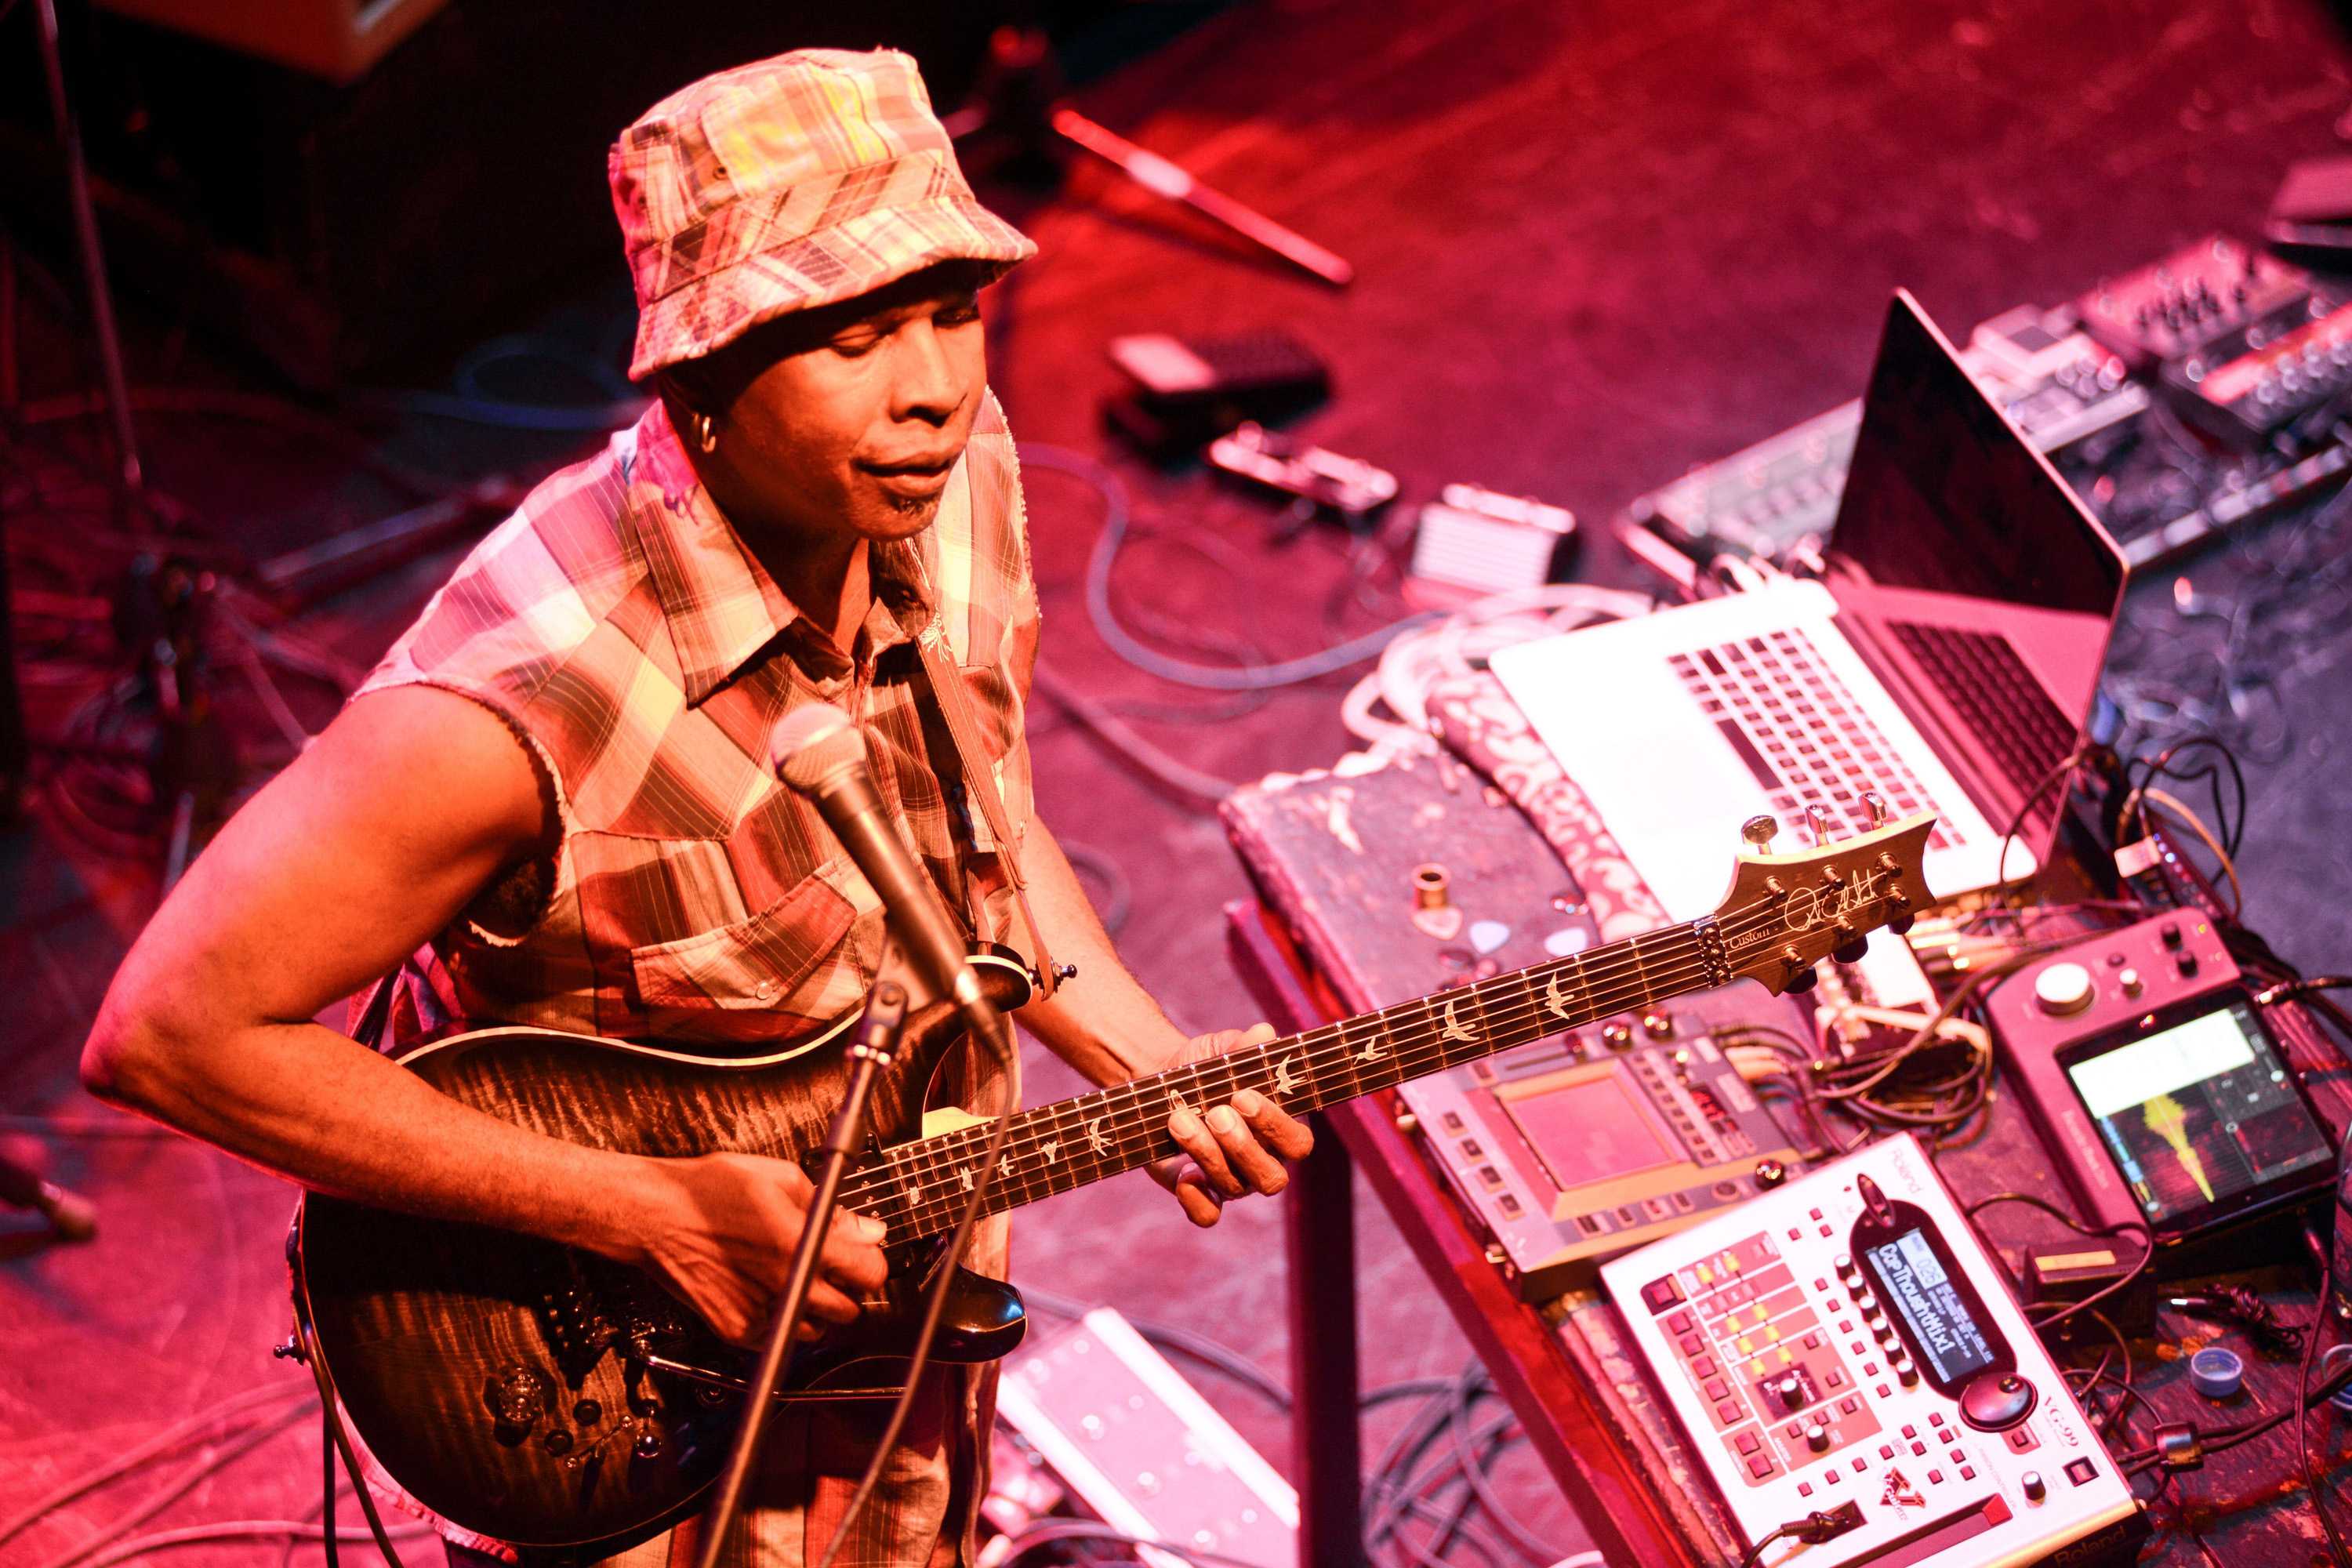 Vernon Reid singing into a microphone while playing the bass, surrounded by other equipment.